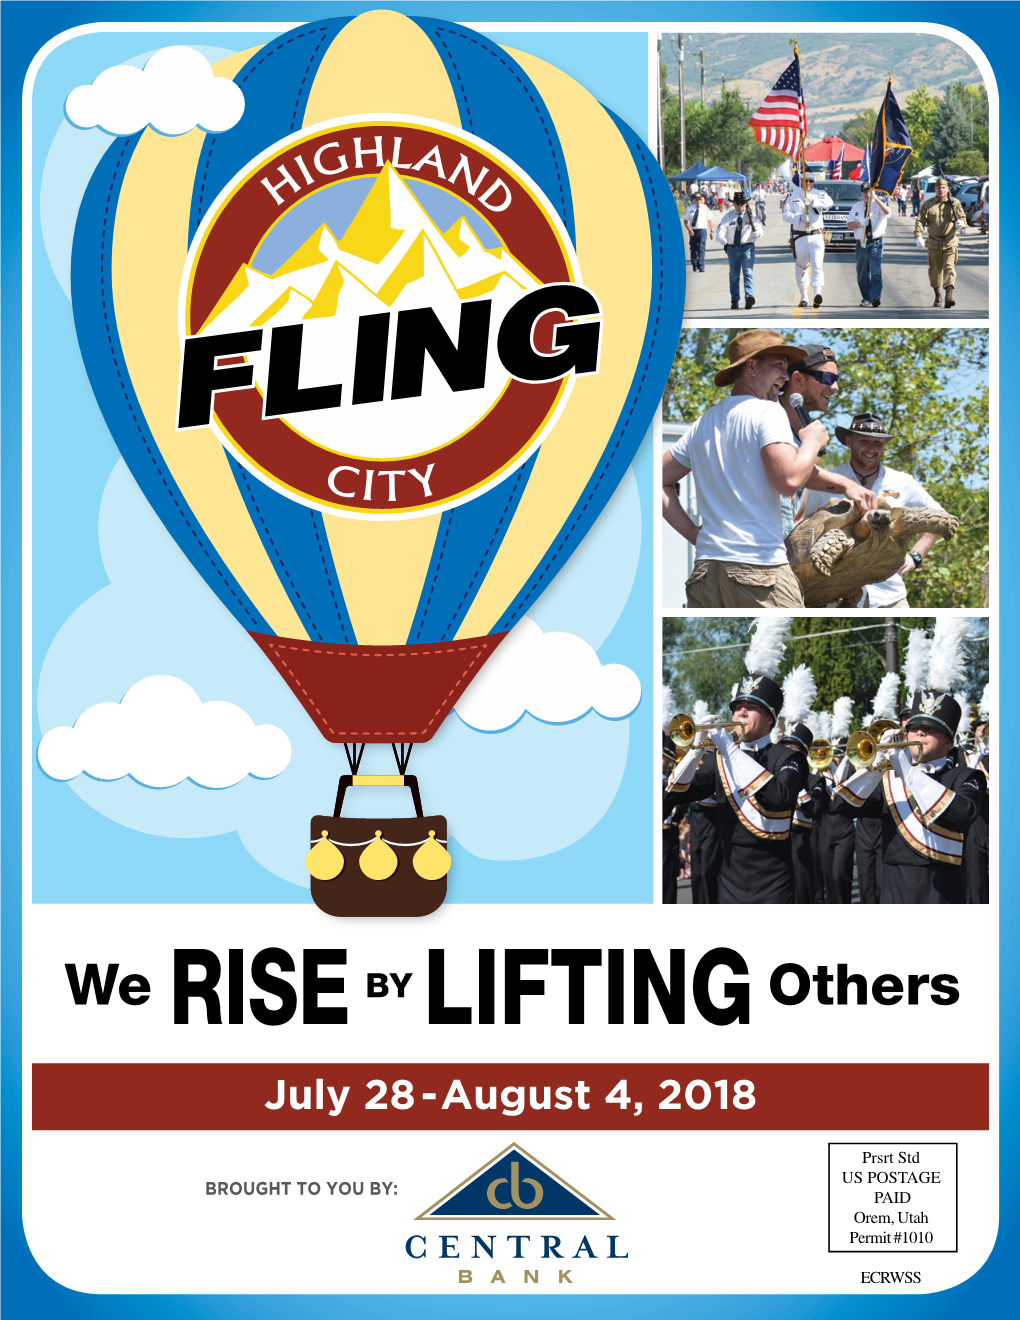 HIGHLAND FLING 2018 Events at a Glance SATURDAY, July 28 MONDAY, July 30 TUESDAY, July 31 Family Adventure Race (P